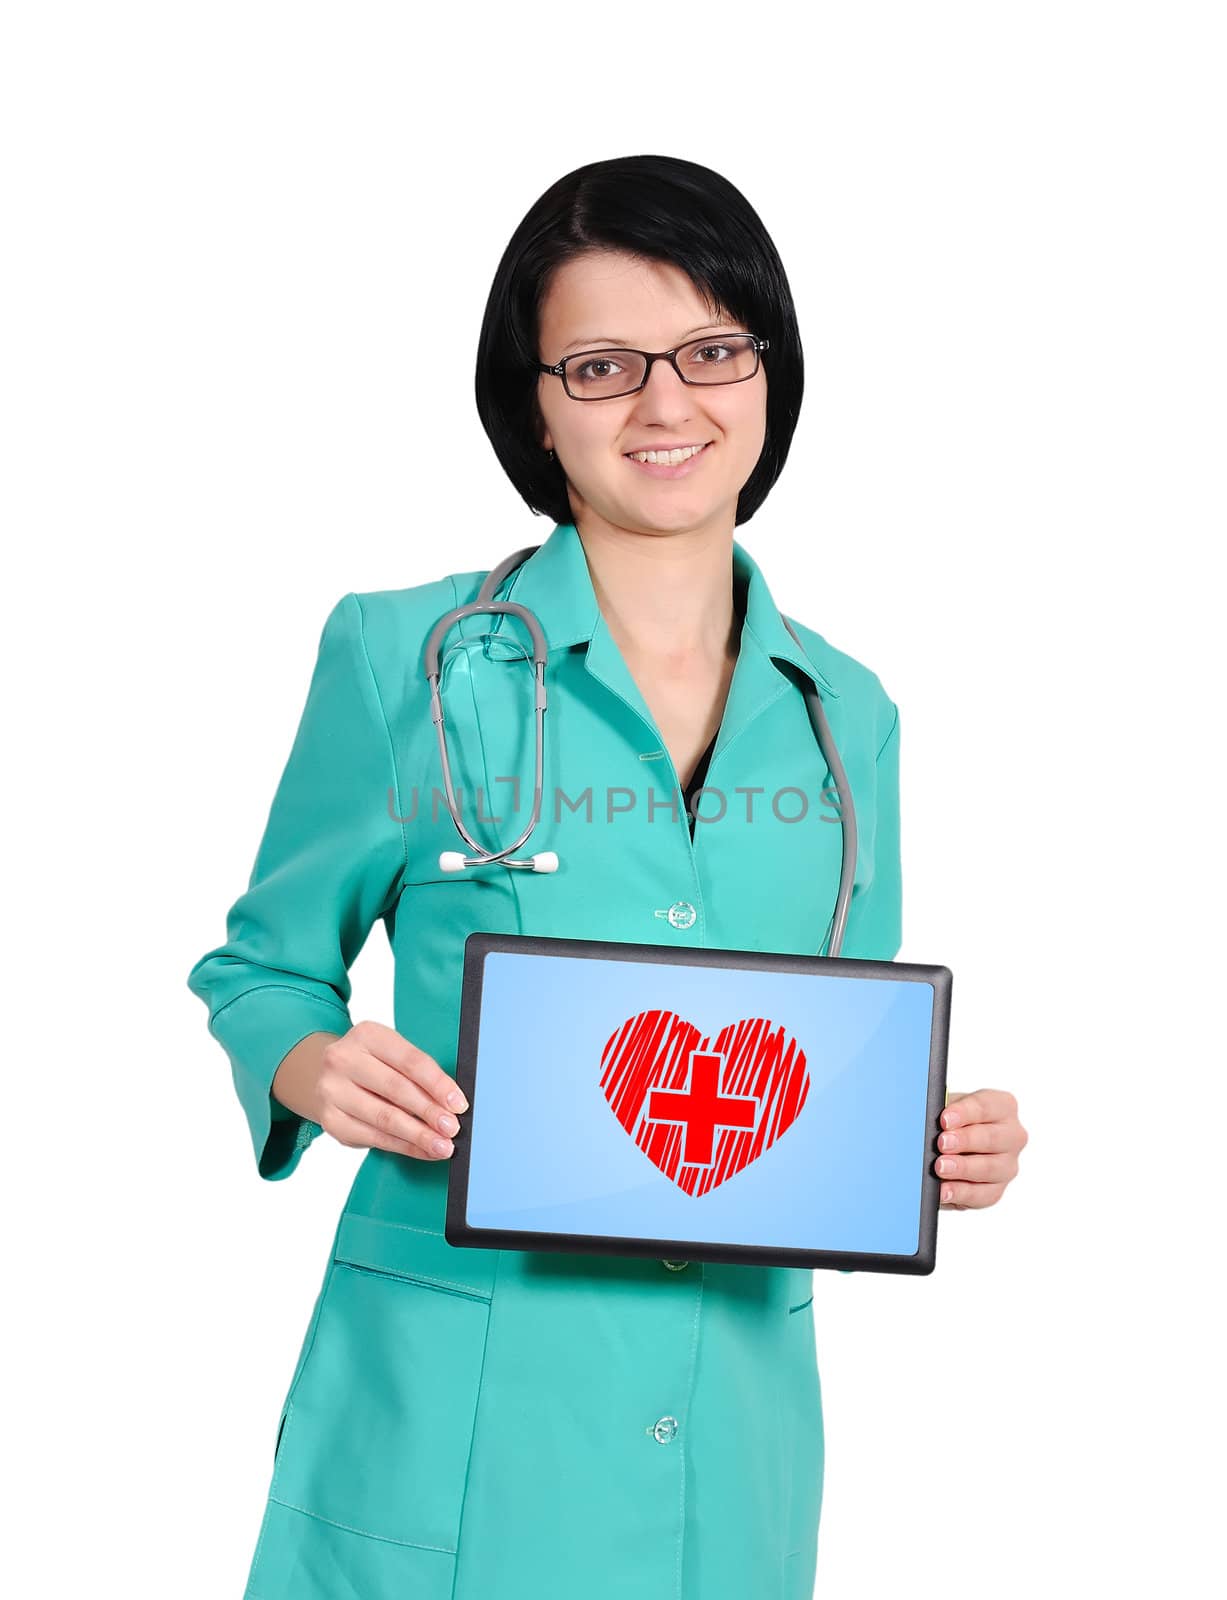 heart symbol on tablet by vetkit